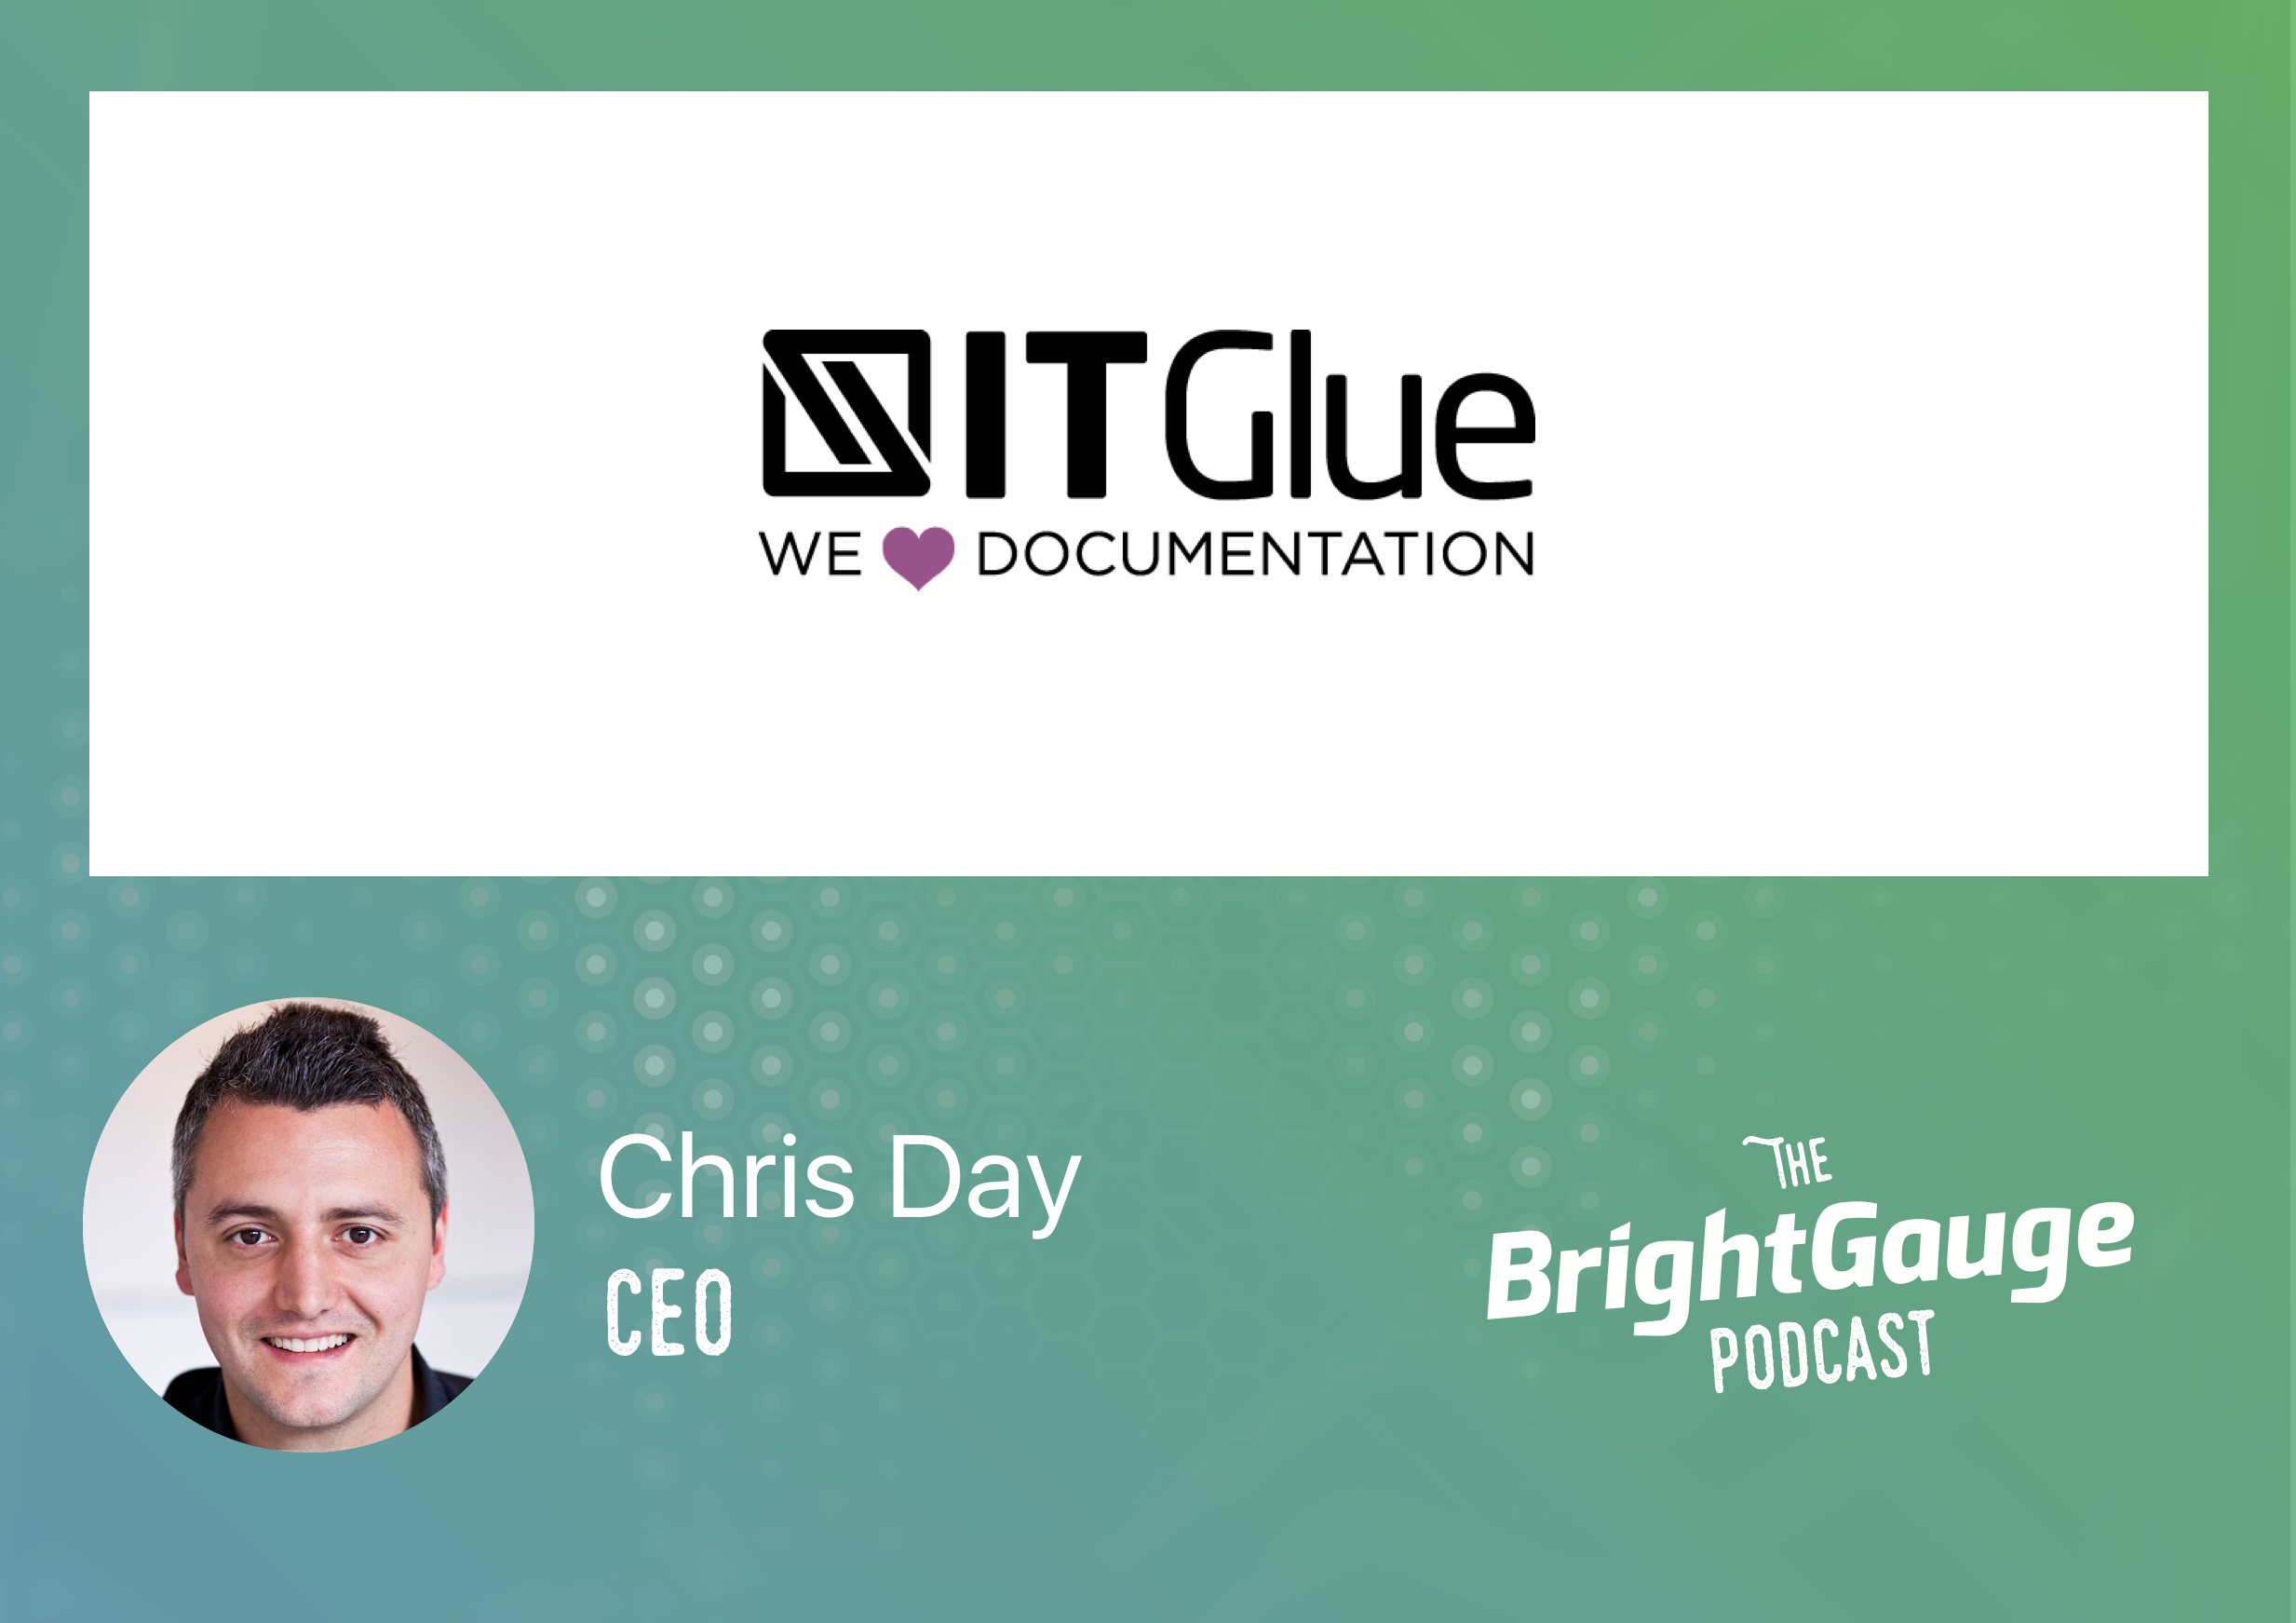 [Podcast] Episode 36 with Chris Day of IT Glue